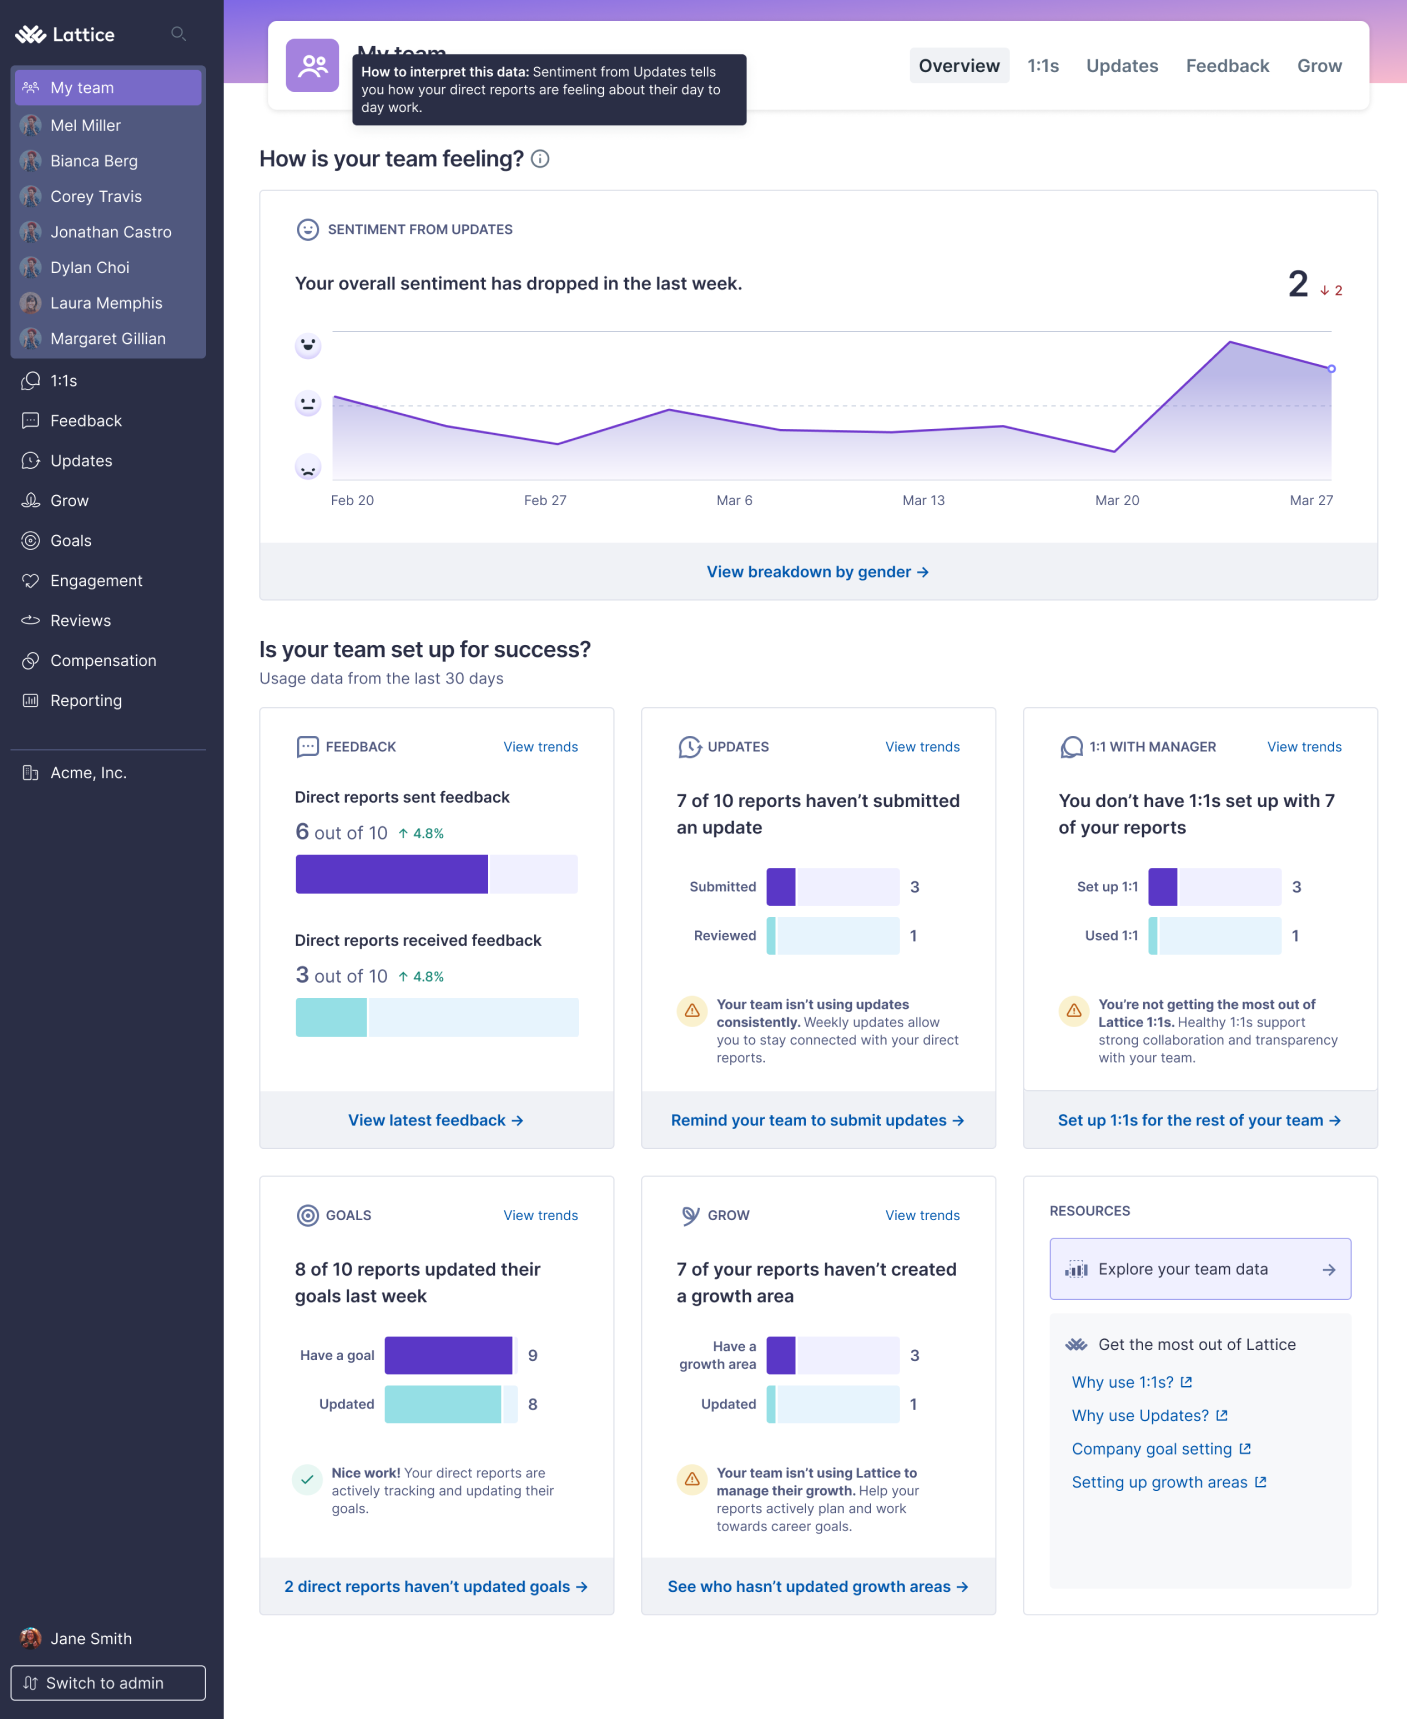 My Team page opened to the Overview tab. At the top of the page a sentiment line graph can be seen. Below the graph are cards for Feedback, Updates, Goals, Grow, and 1:1s.